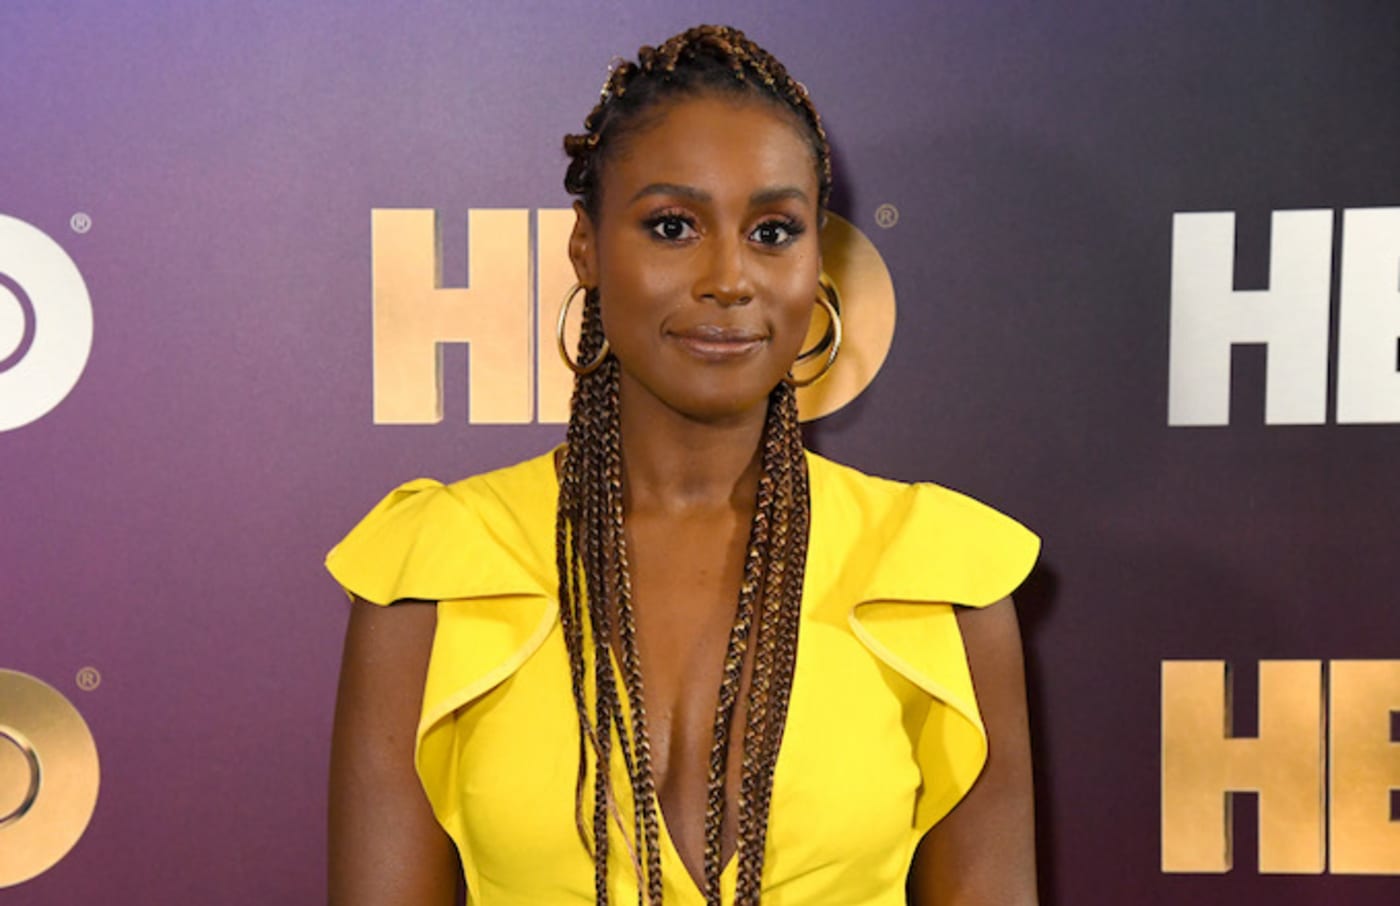 Issa Rae attends the HBO Summer TCA Panels.